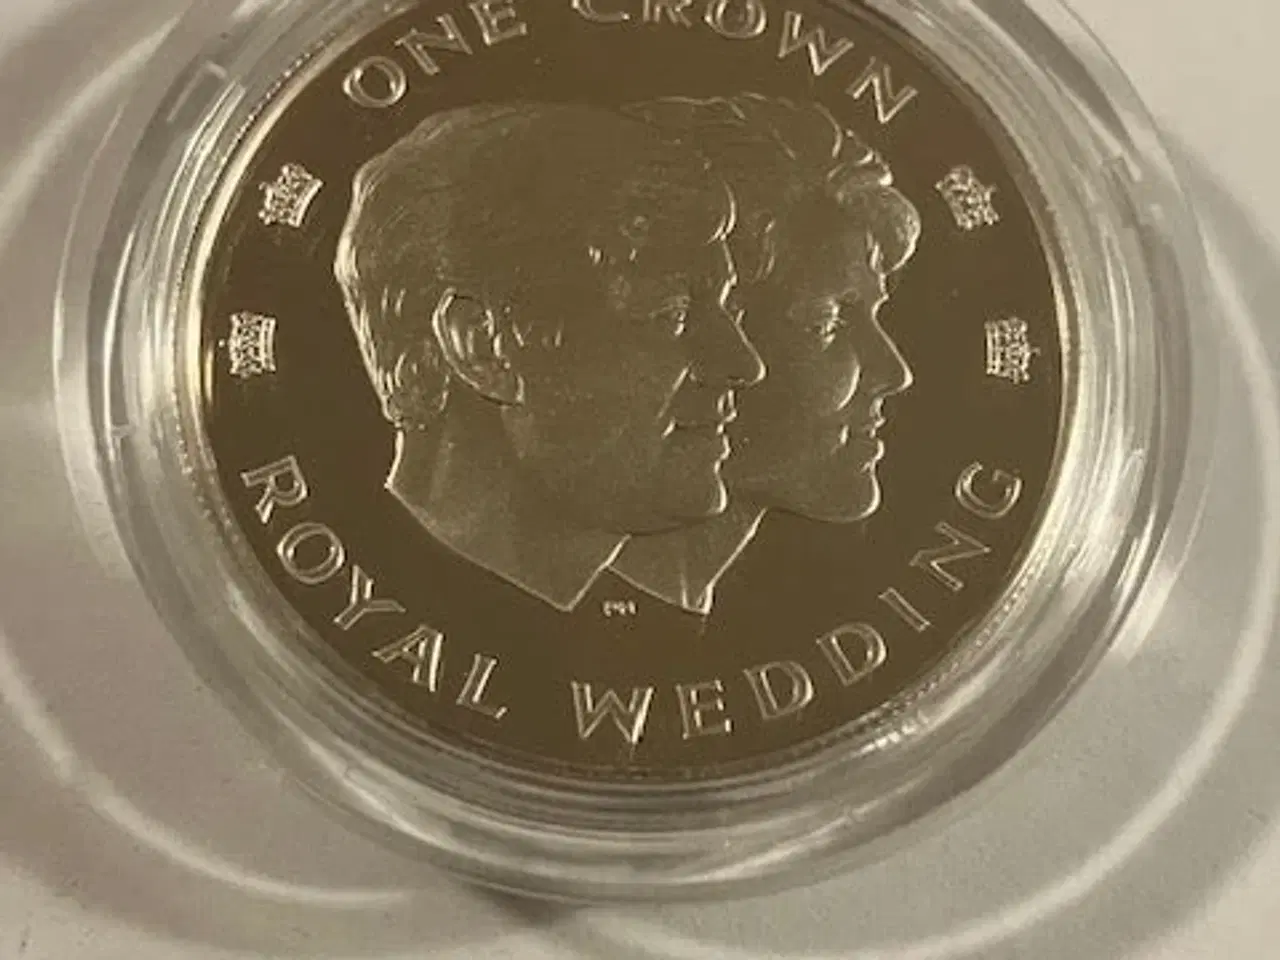 Billede 2 - One Crown 1986 Turks and Caicos Islands